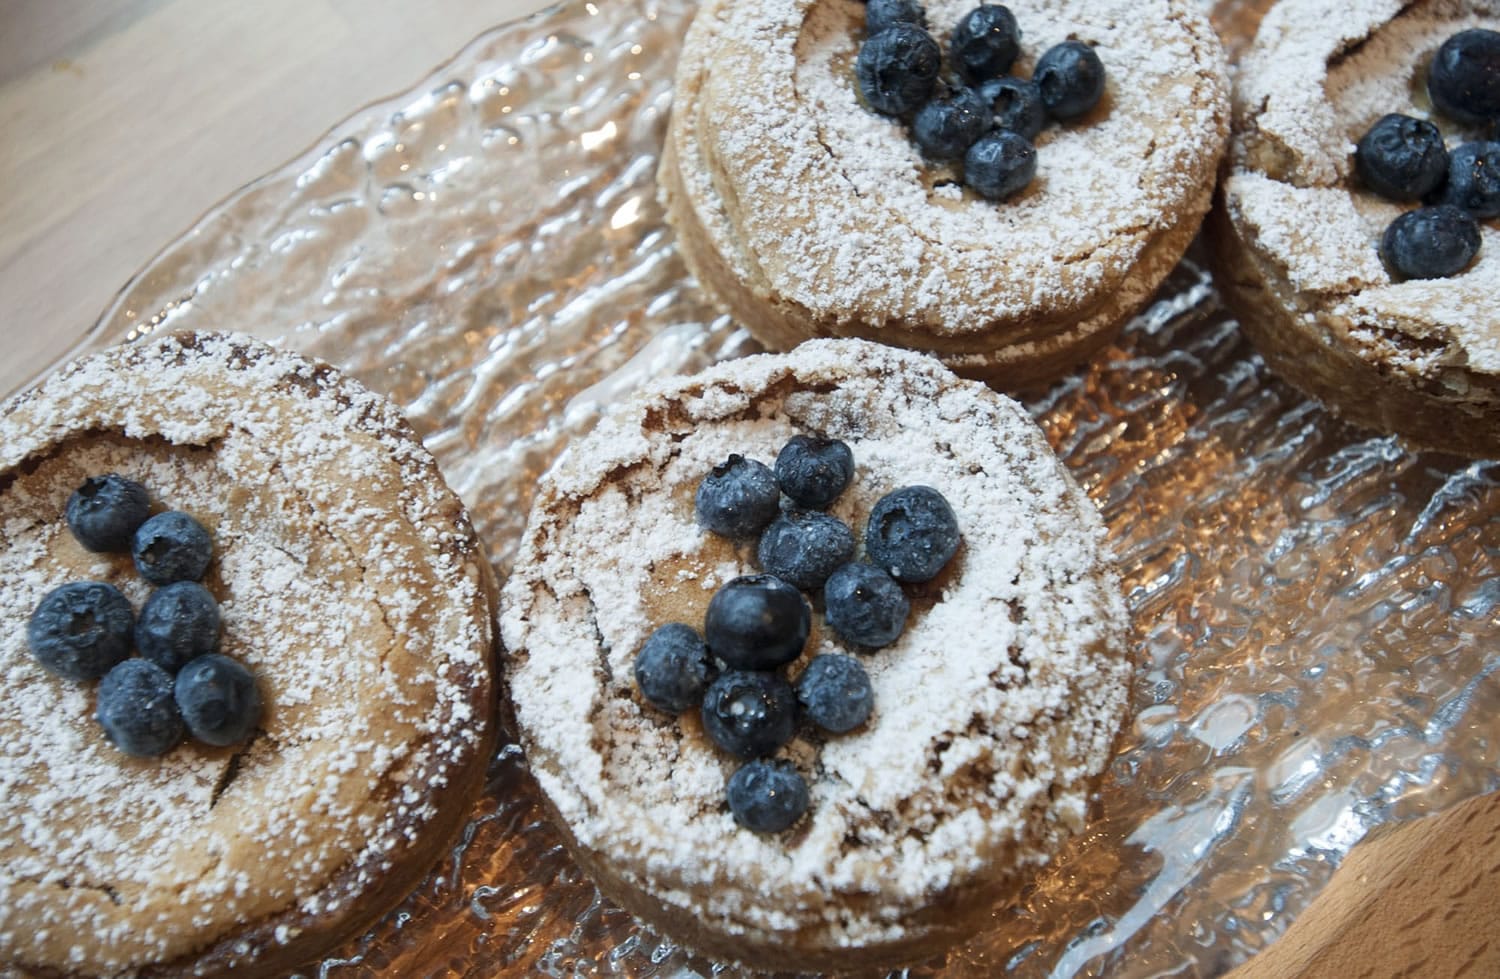 A brown butter tart with blueberries is served at the Bleu Door Bakery.